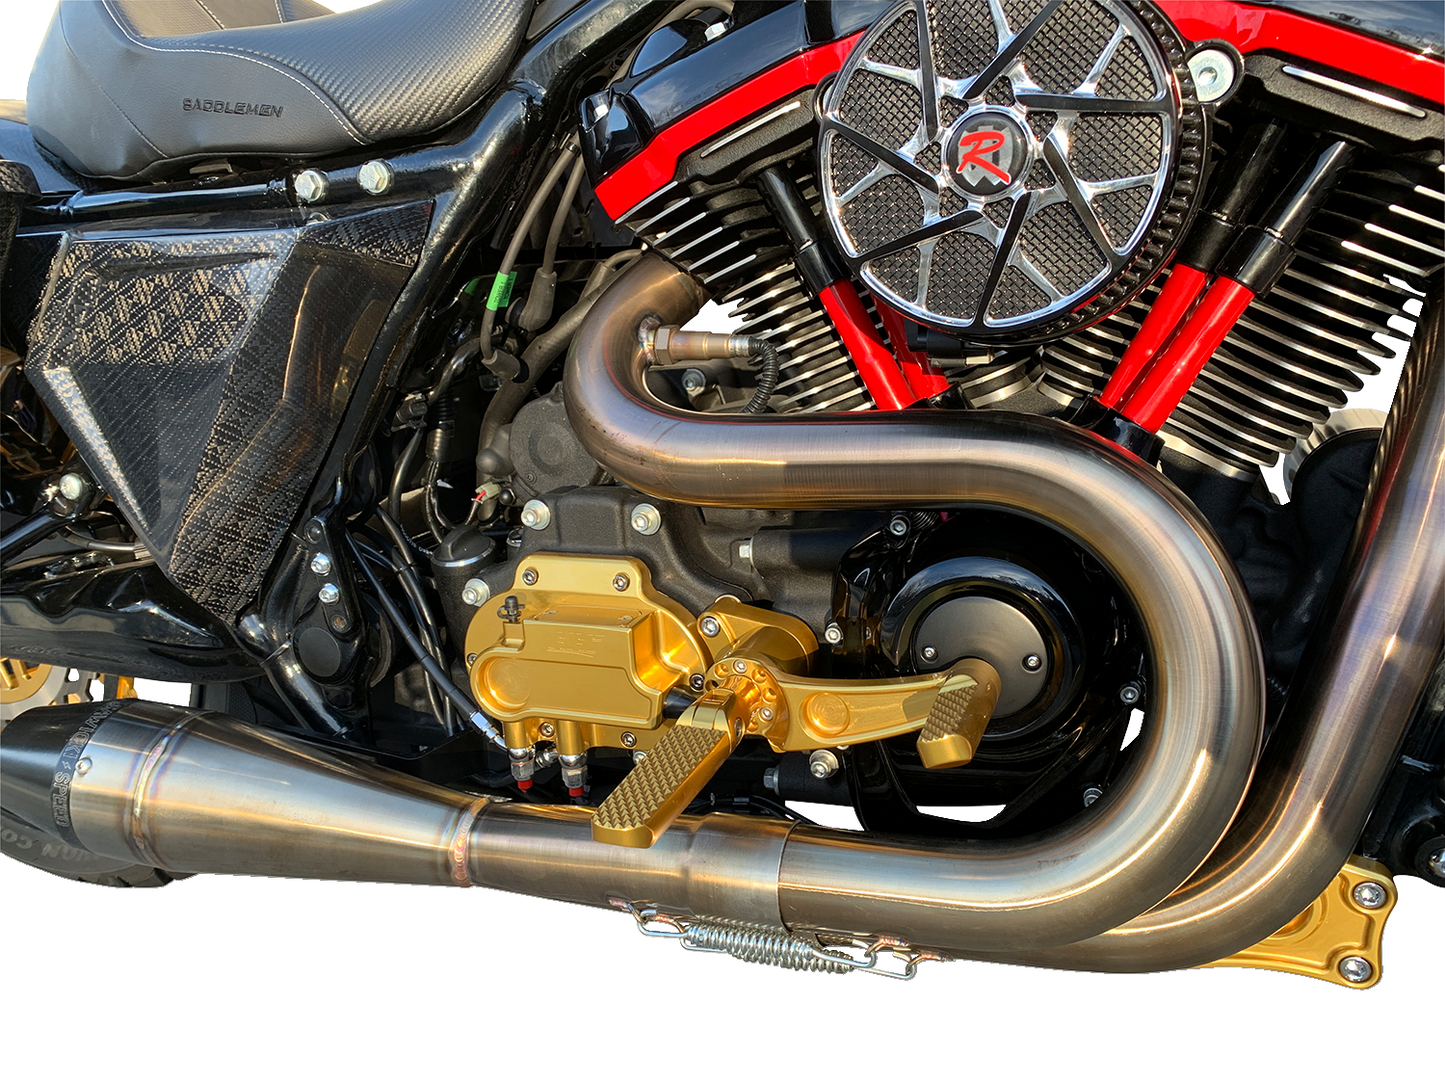 HAWG HALTERS Mid Control Conversion Kit - Gold - Knurled Pegs - FLH/FLT MCK-FH16GS-FK